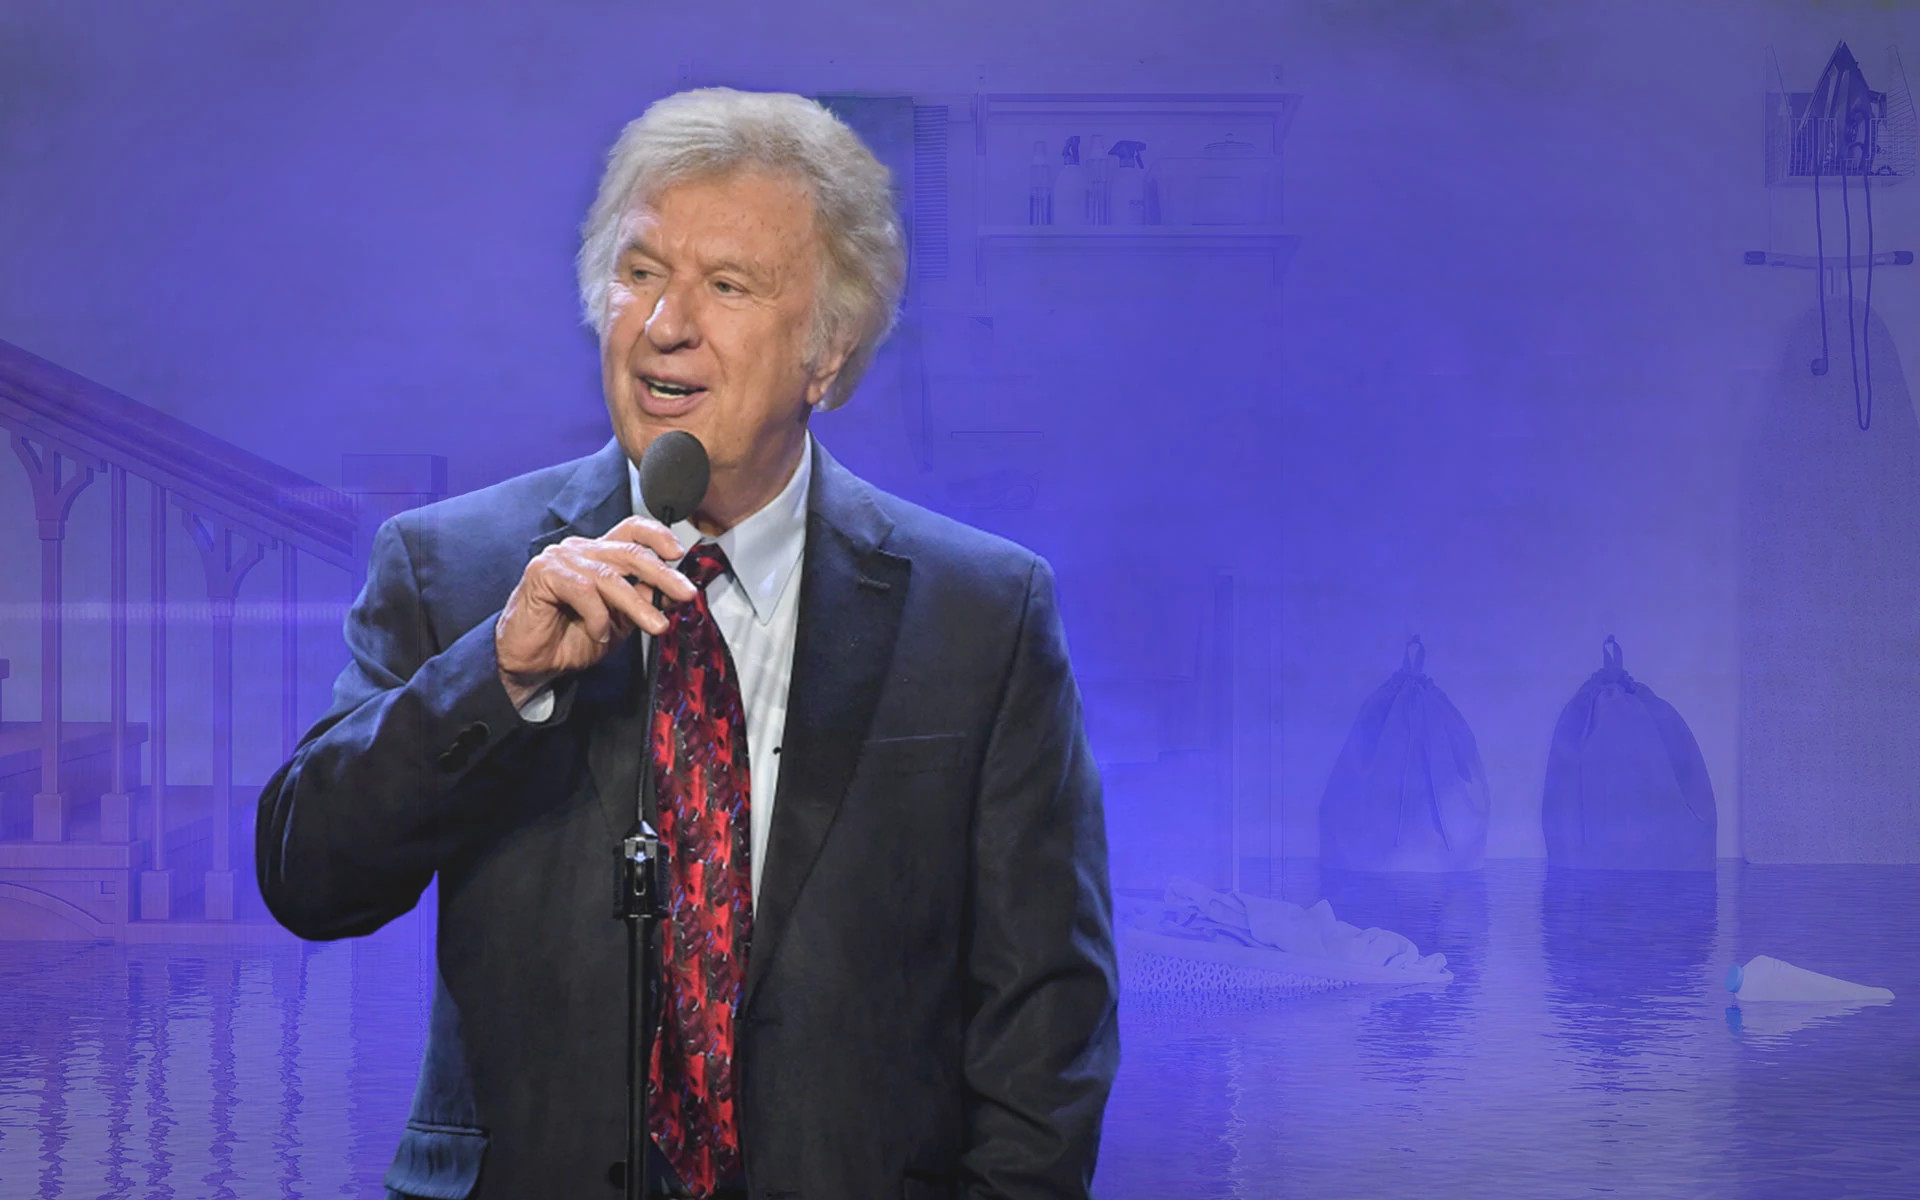 Friends for Life: Bill Gaither and Dr. James Dobson